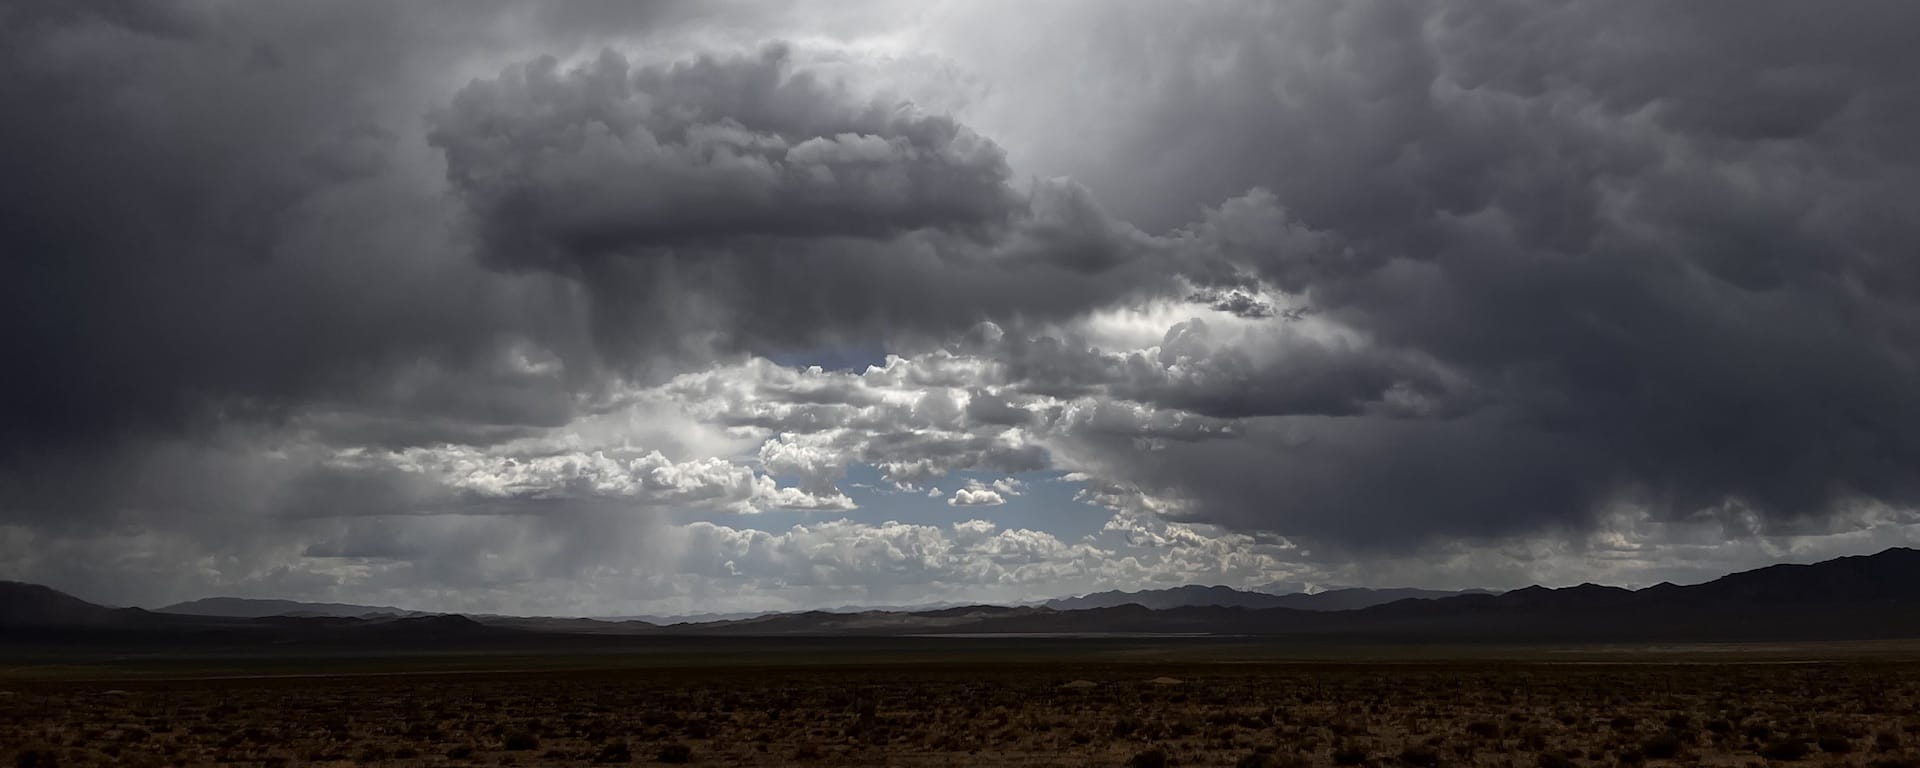 A desert sky with thunderstorms in the distance